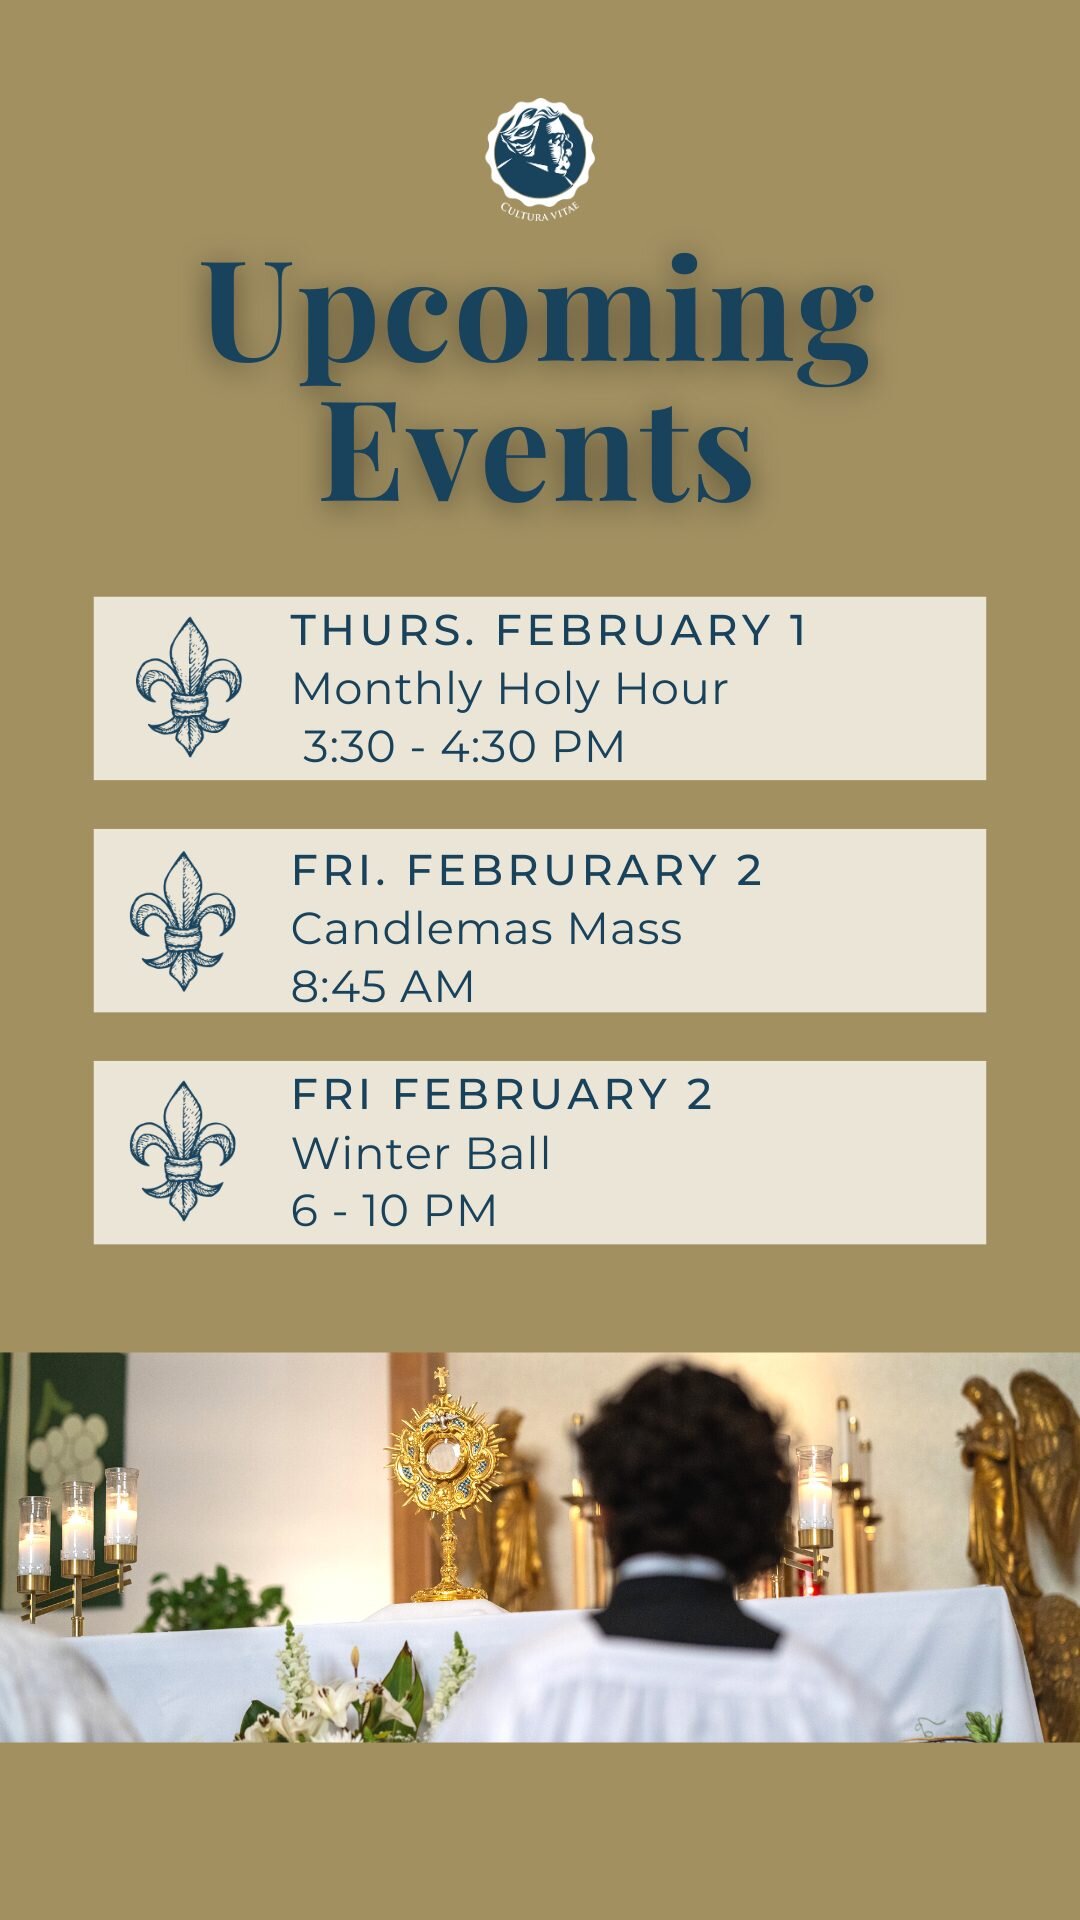 Join our community this Catholic Schools Week in prayer and fellowship during our upcoming events: monthly holy hour on Thursday, Candlemas Mass on Friday and Friends of Chesterton Social during our Narnia Winter Ball on Friday night! https://www.cam